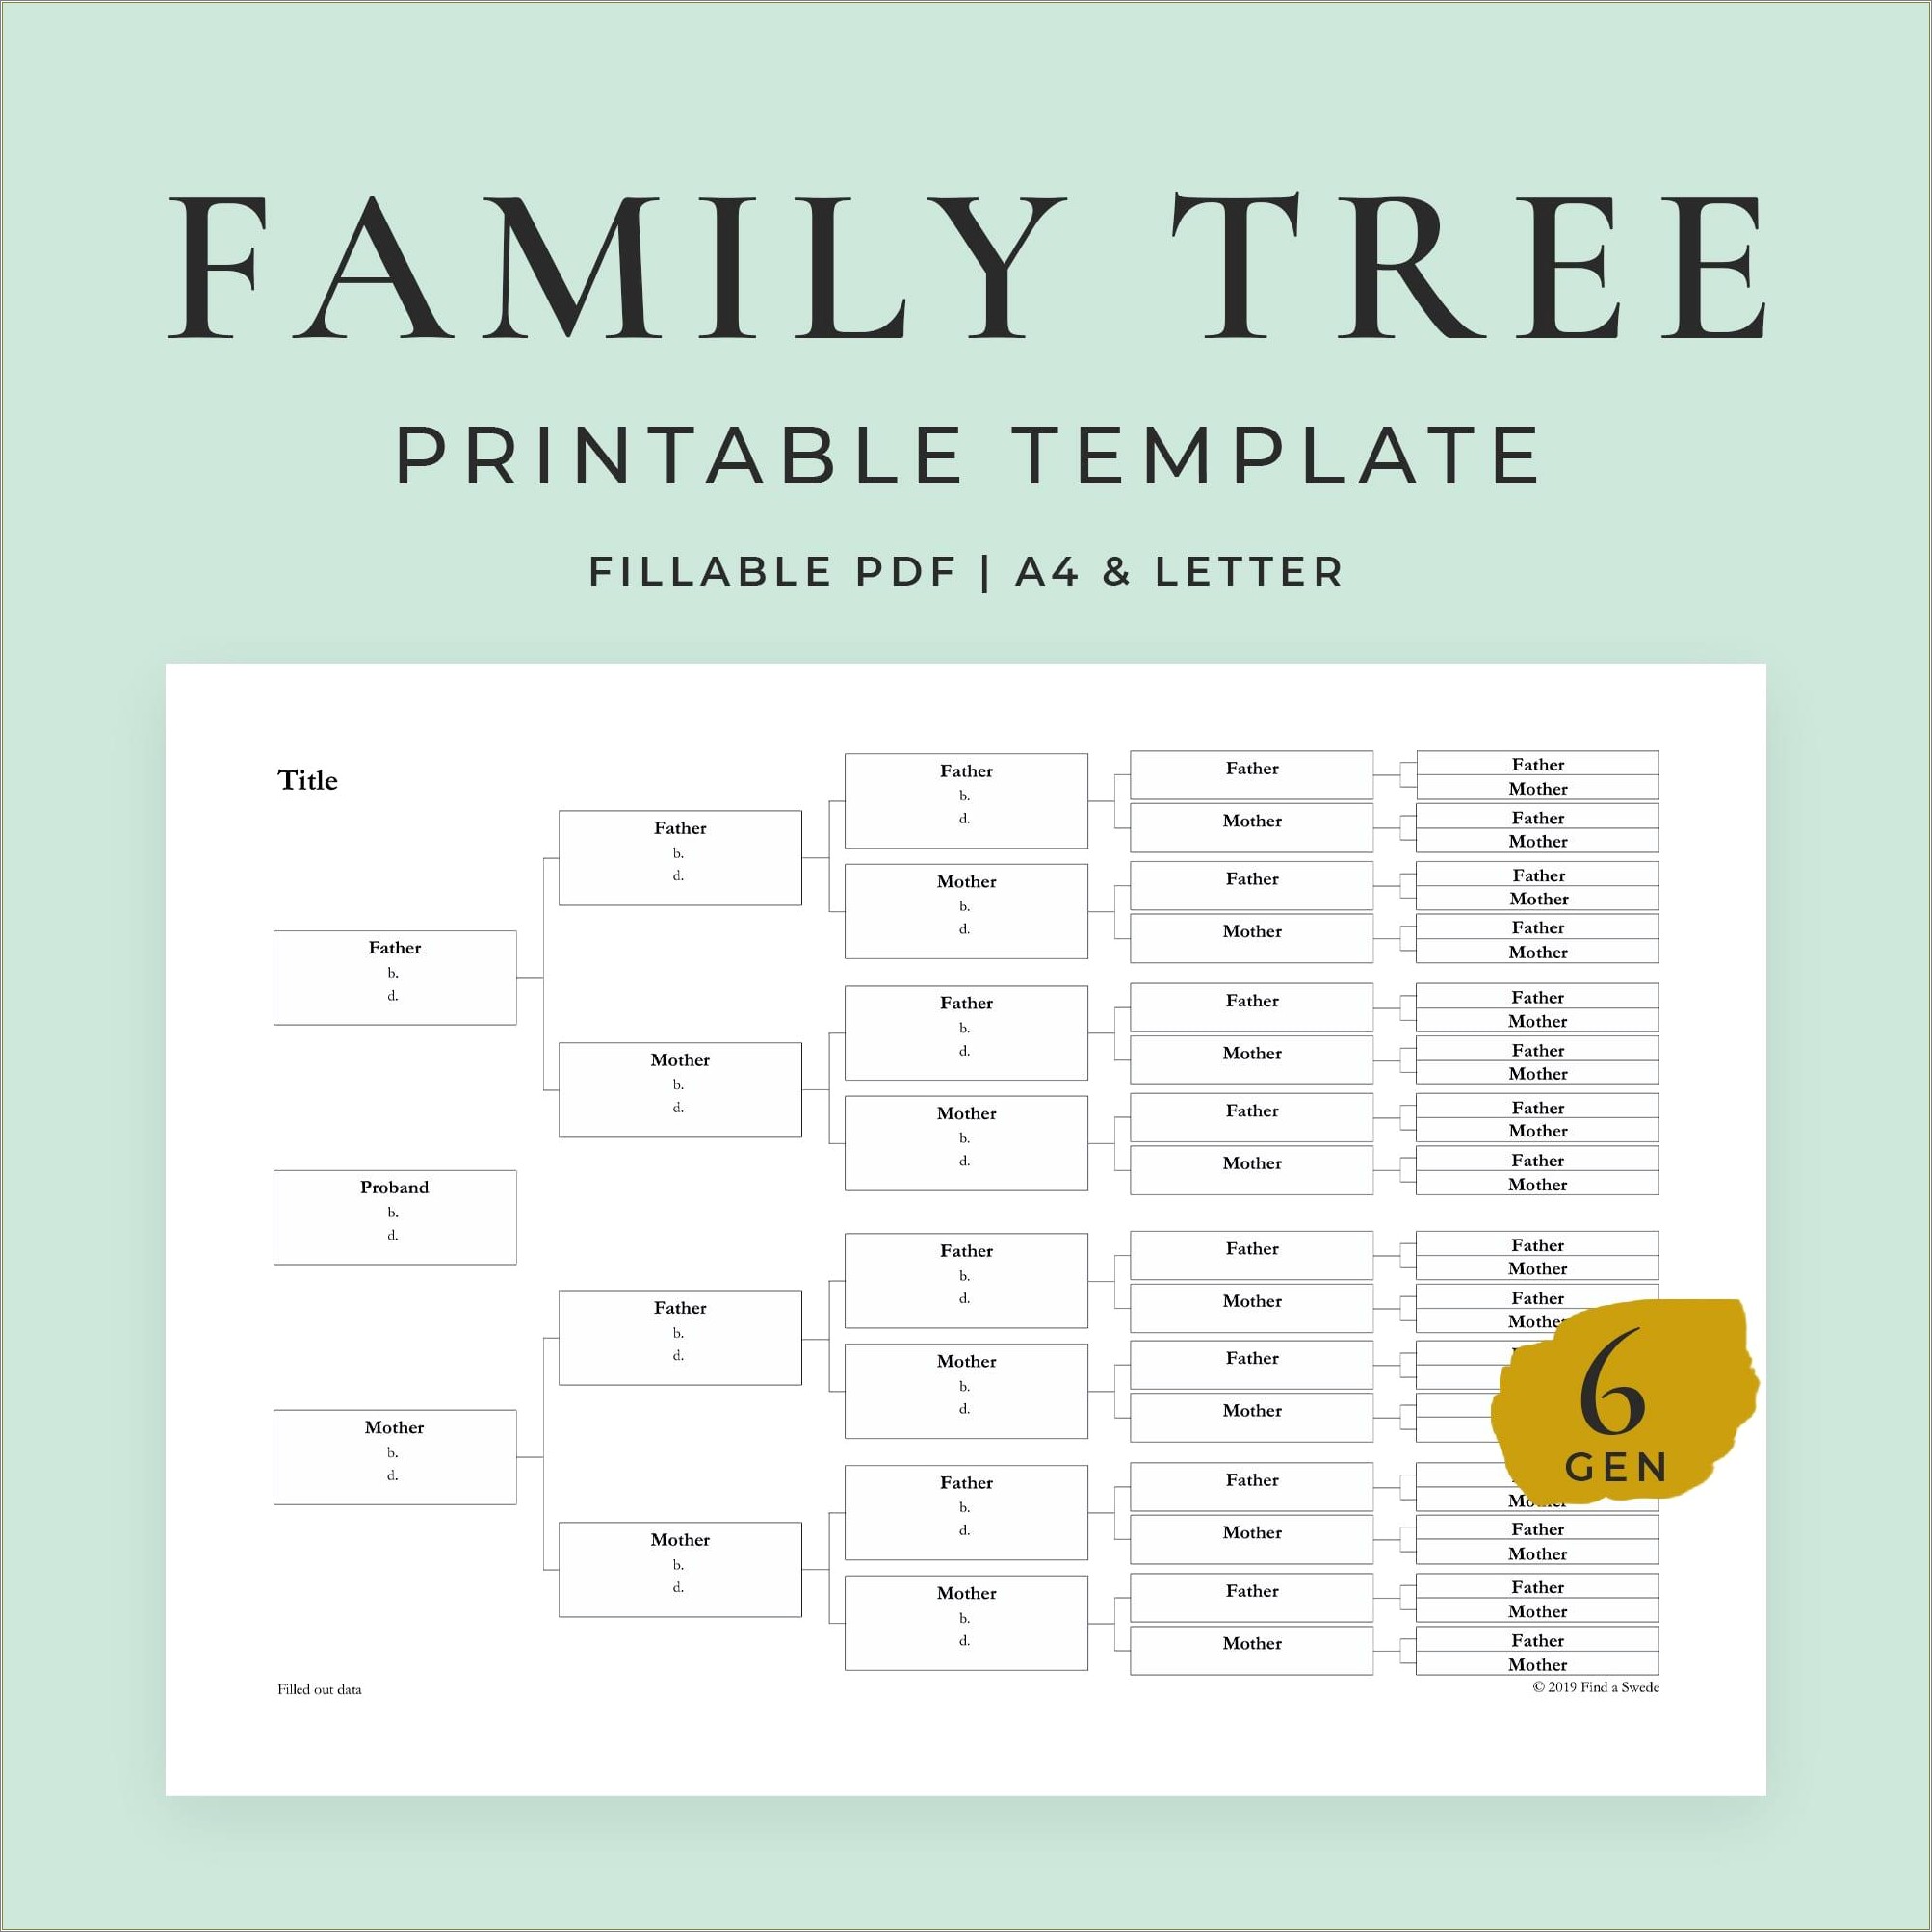 Family Tree Fillable Templates Free Download